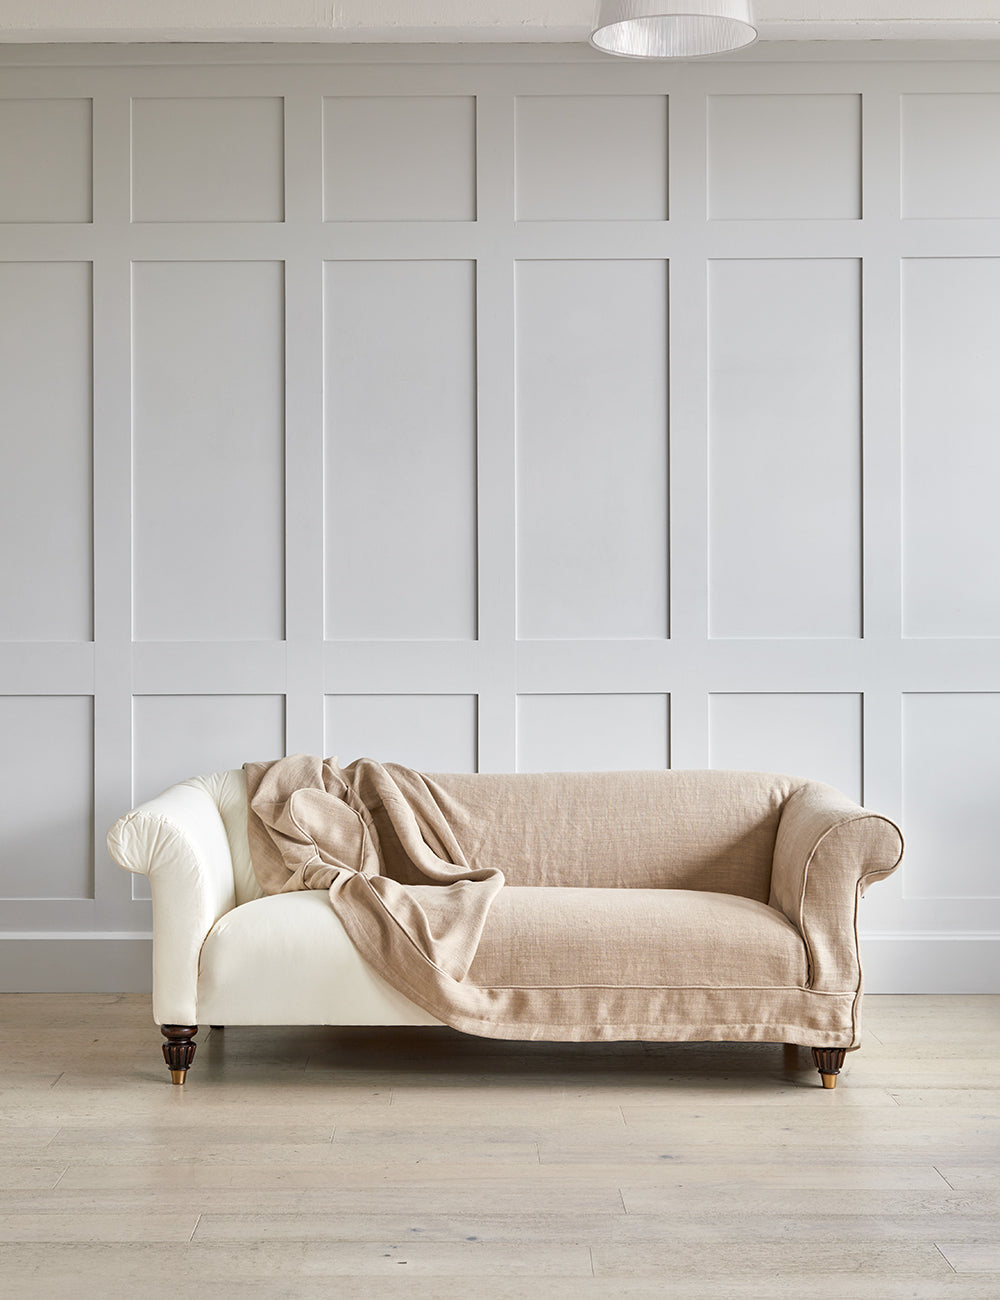 Nora Sofa removable covers